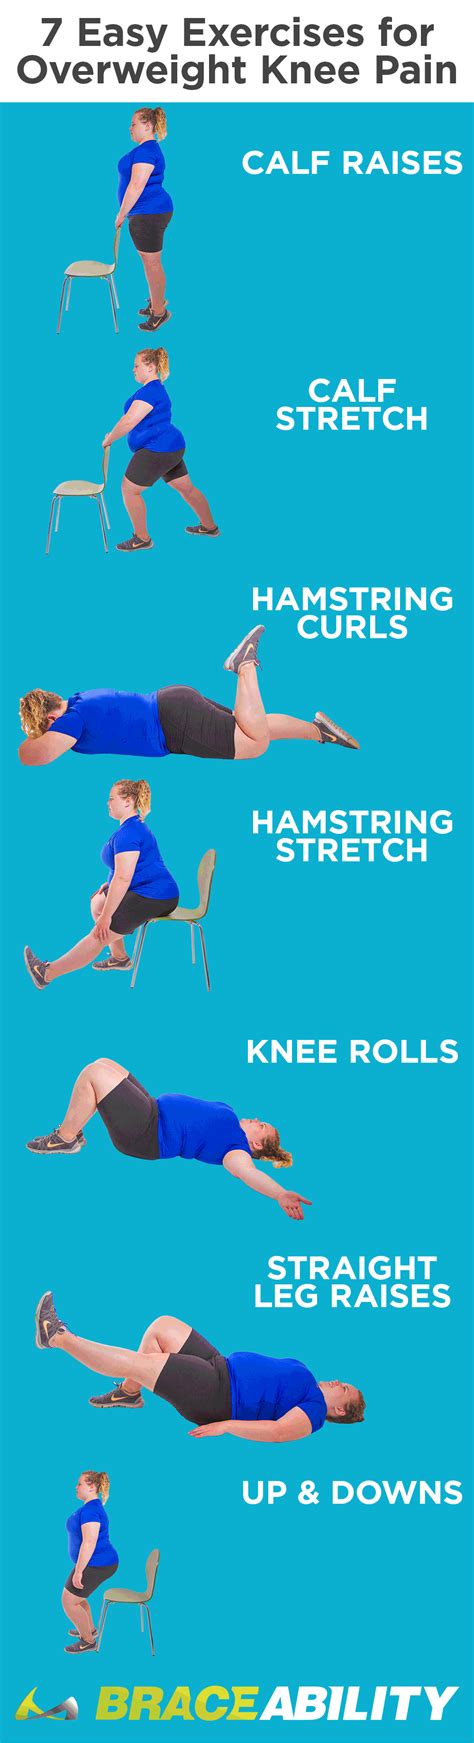 Pin on Knee Pain Relief | Exercises, Stretches & Yoga to Help Knee Injuries and Prevent Knee ...